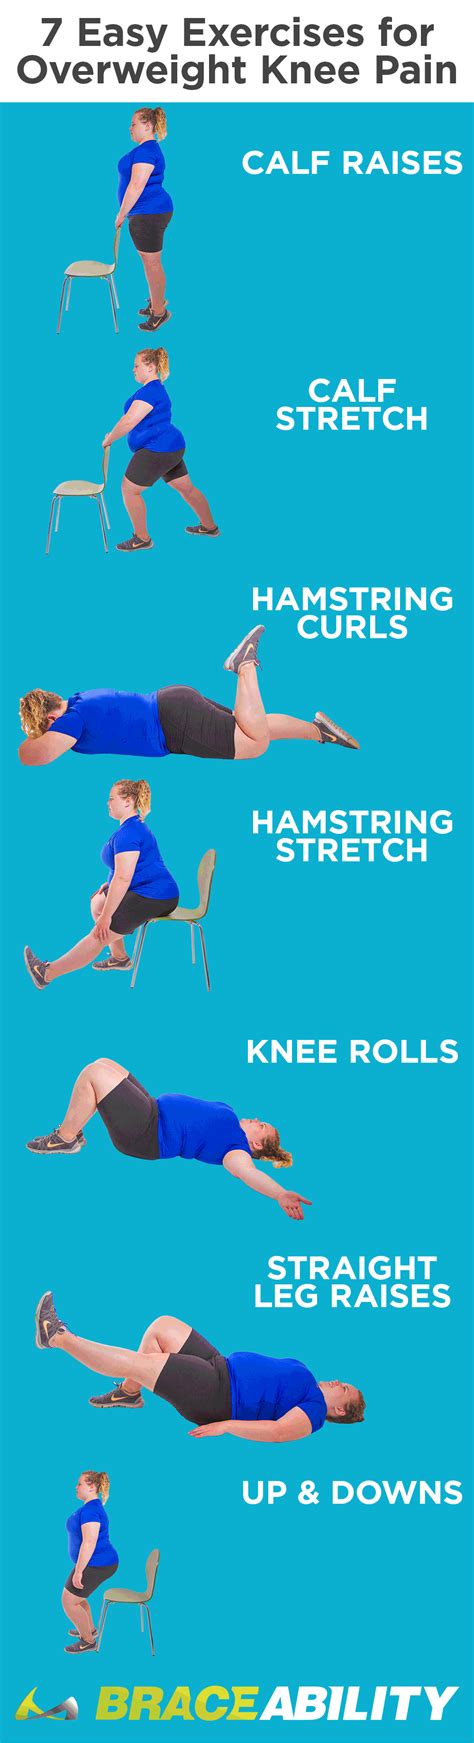 Pin on Knee Pain Relief | Exercises, Stretches & Yoga to Help Knee Injuries and Prevent Knee ...